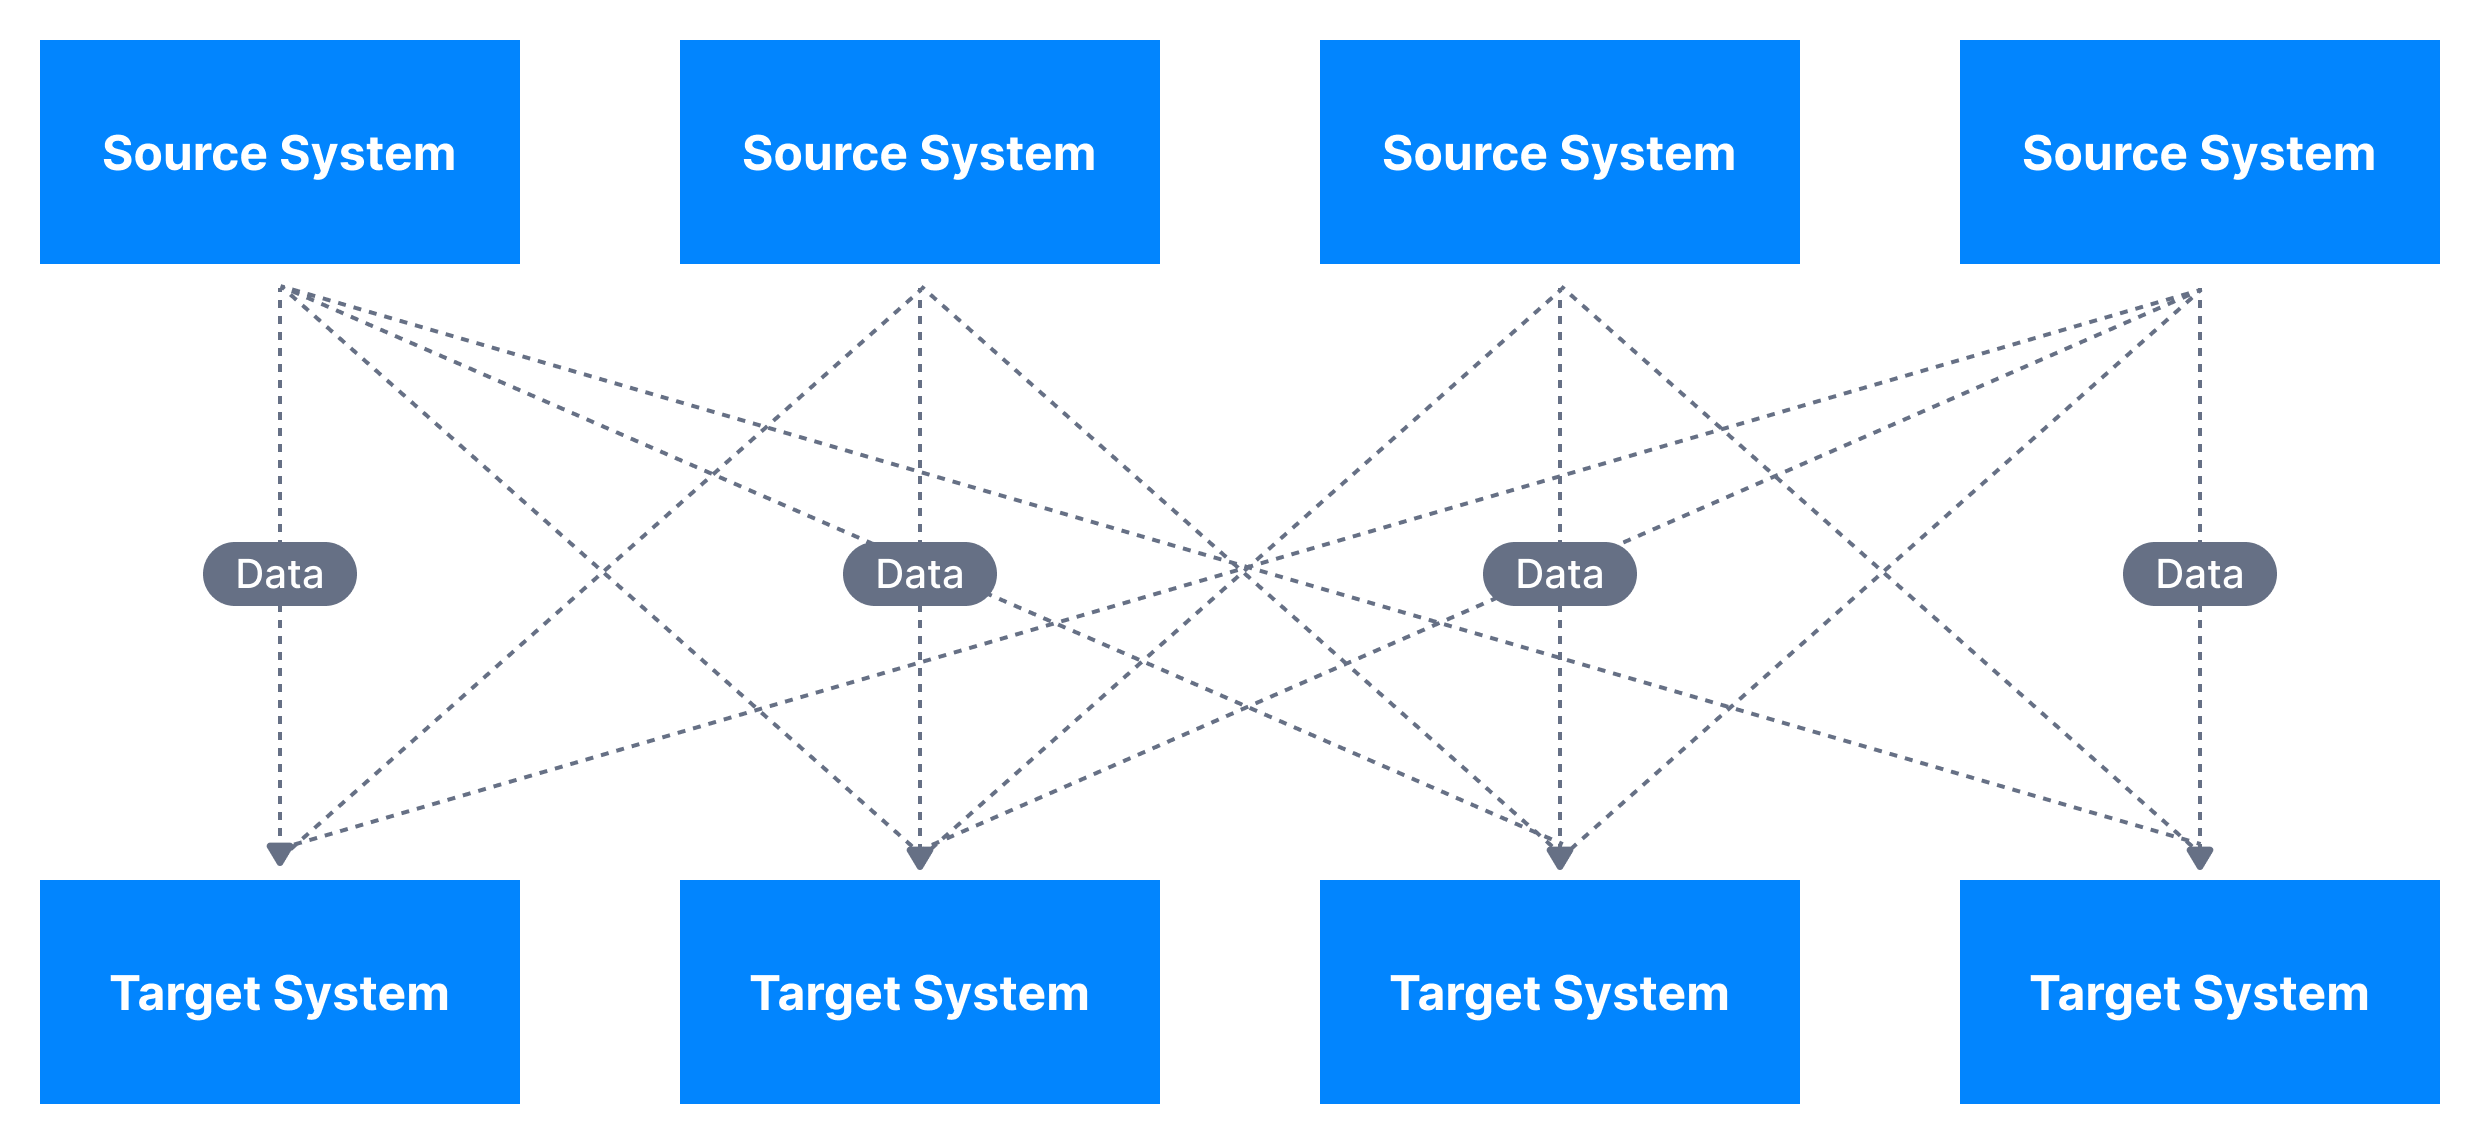 Apache Kafka helps to solve many of the challenges associated with the integration of data from multiple different systems. This diagram shows how complex the flow of data can be when systems are not decoupled.